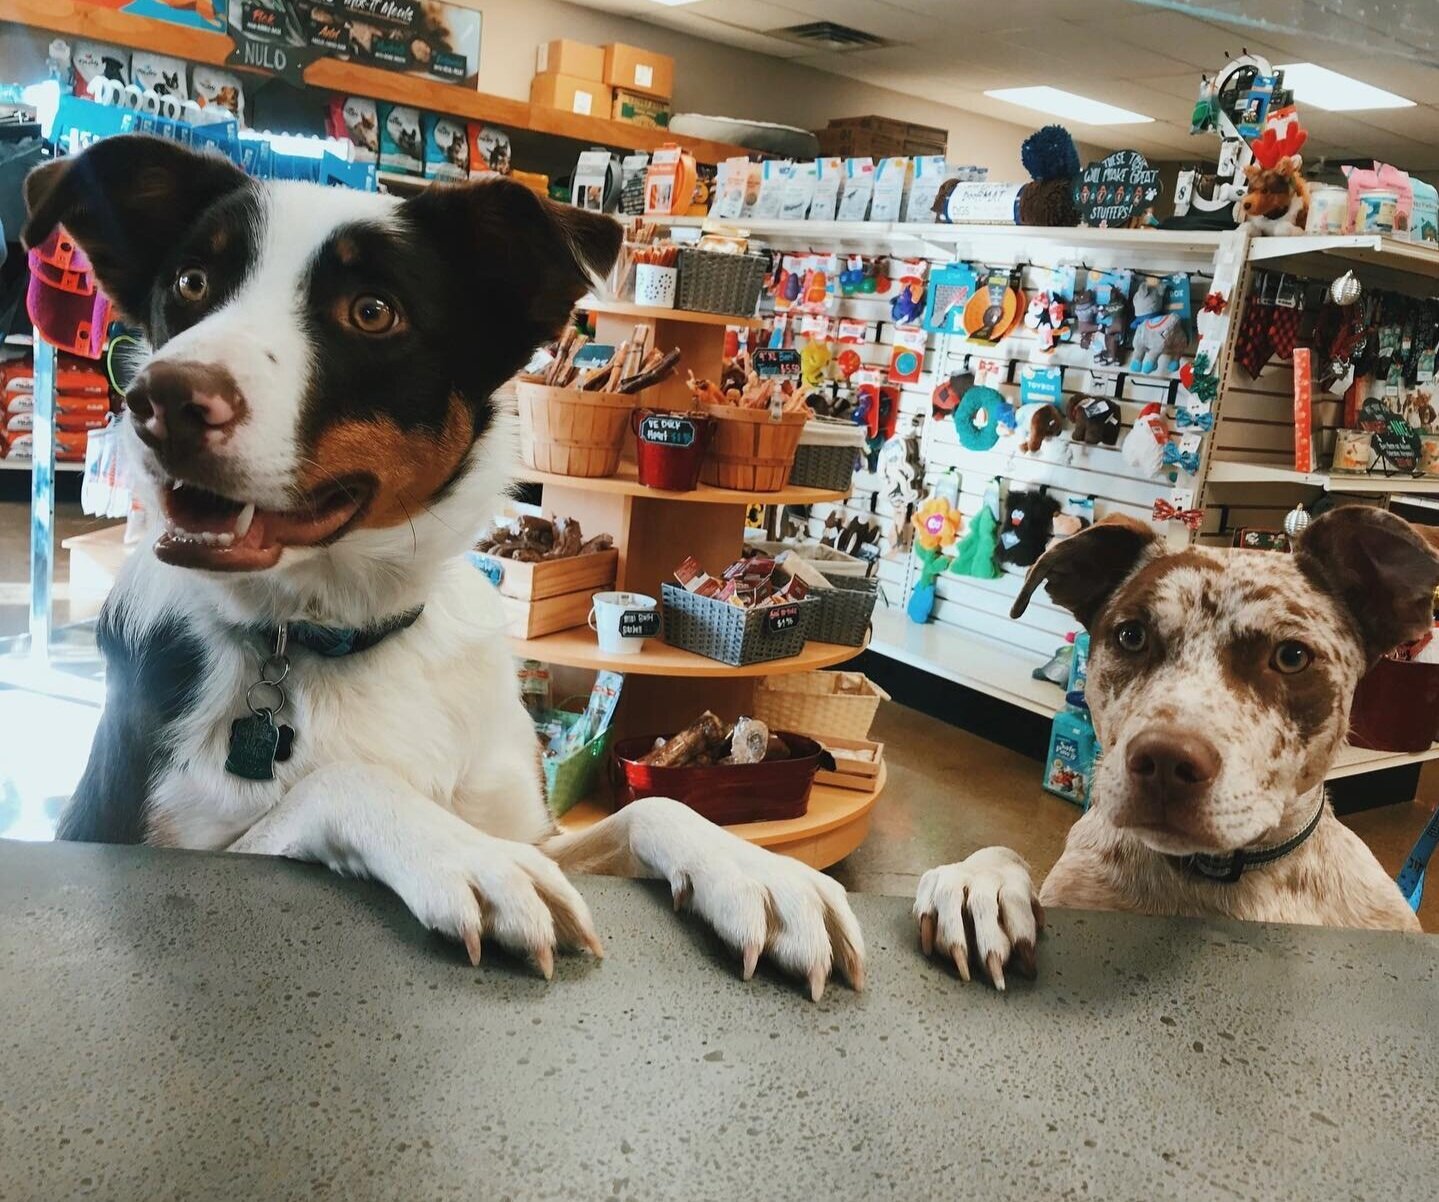 Two dogs place their paws on the counter at The Dog’s Meow pet store in Draper, Utah